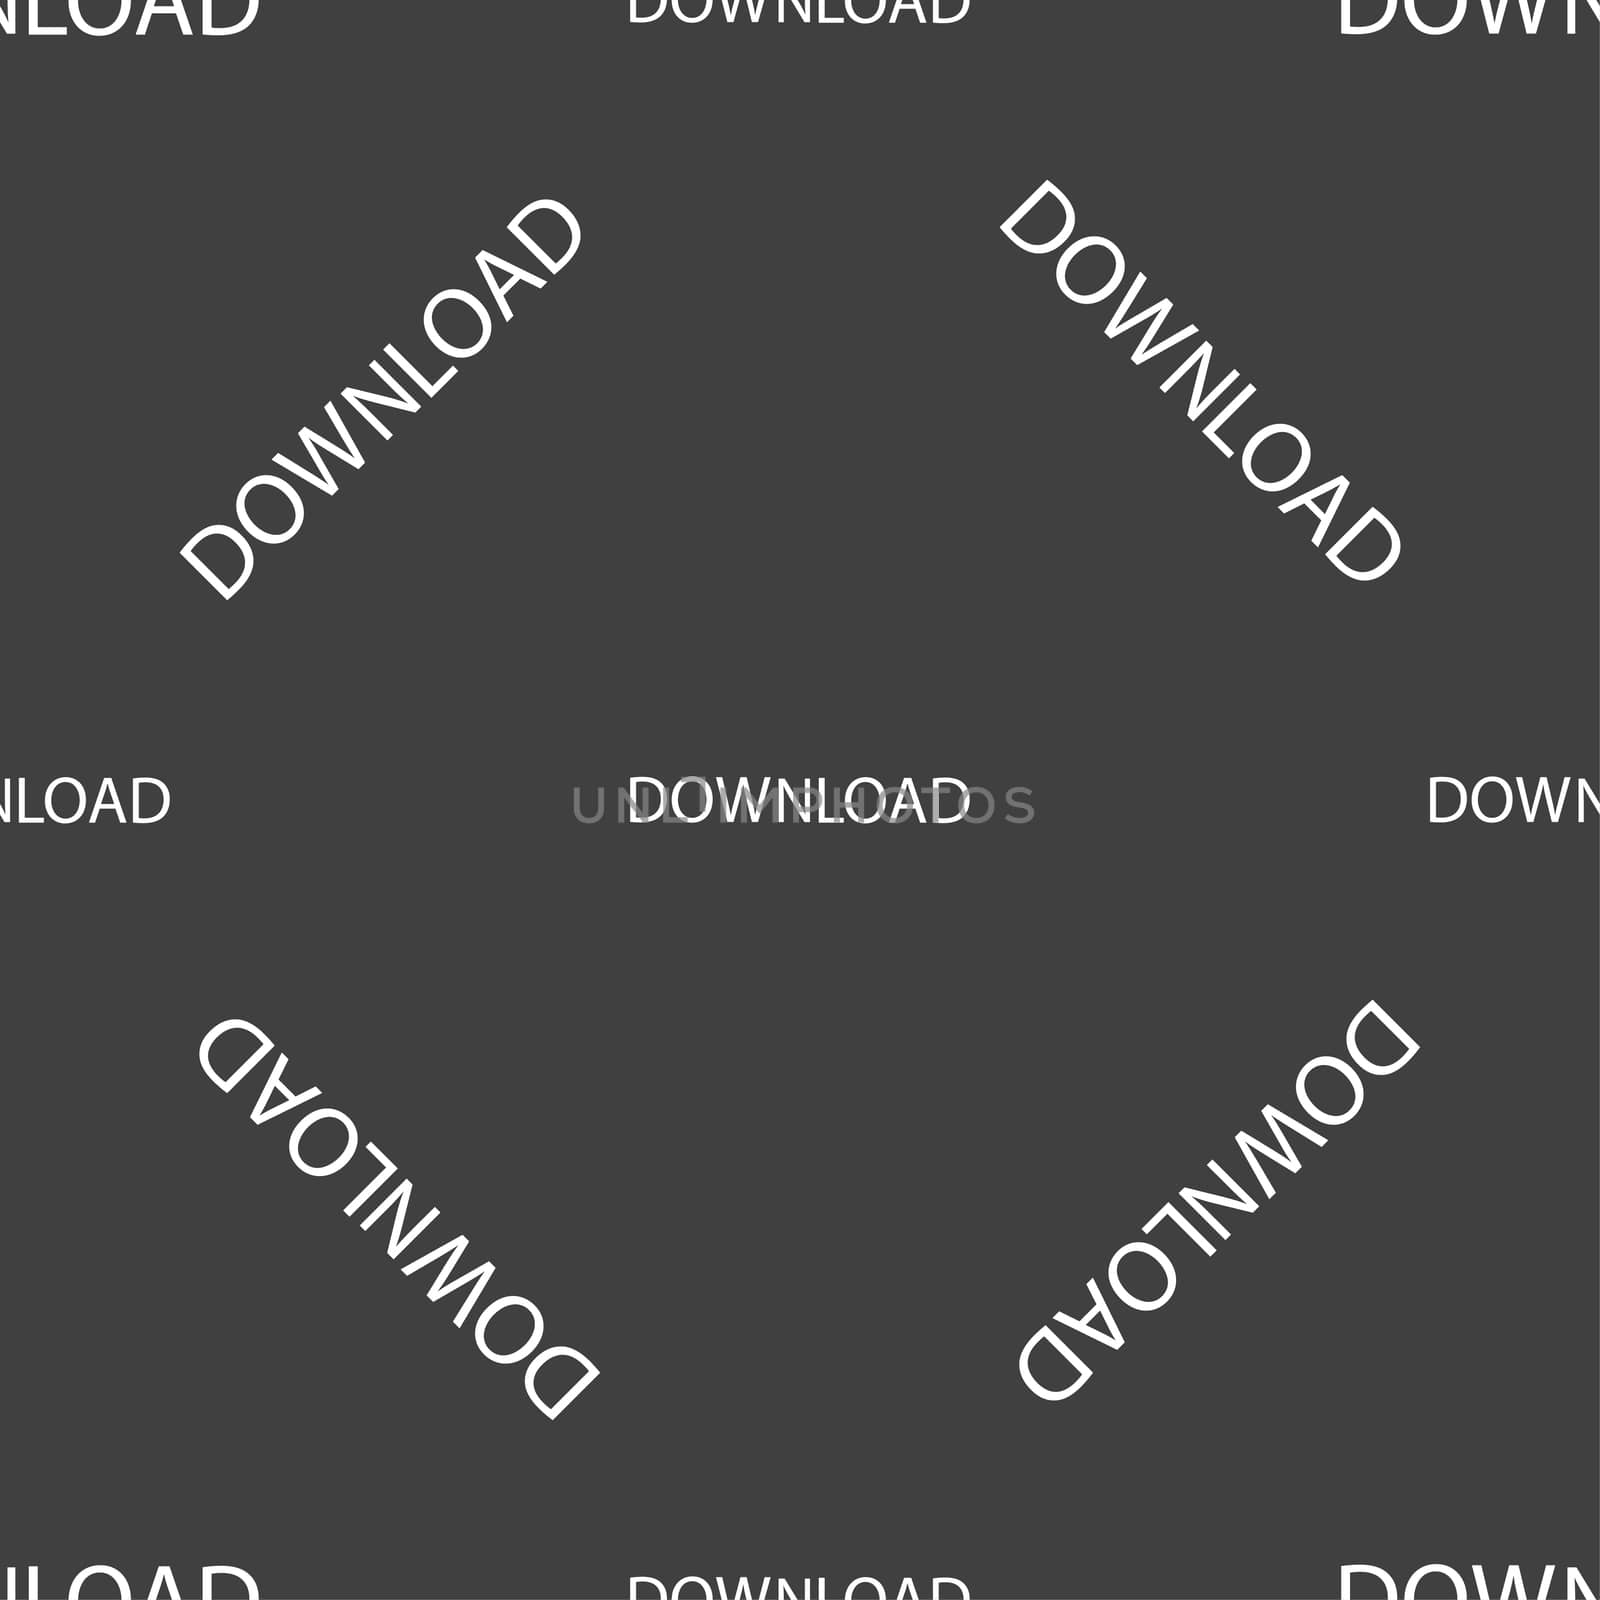 Download icon. Upload button. Load symbol. Seamless pattern on a gray background.  by serhii_lohvyniuk